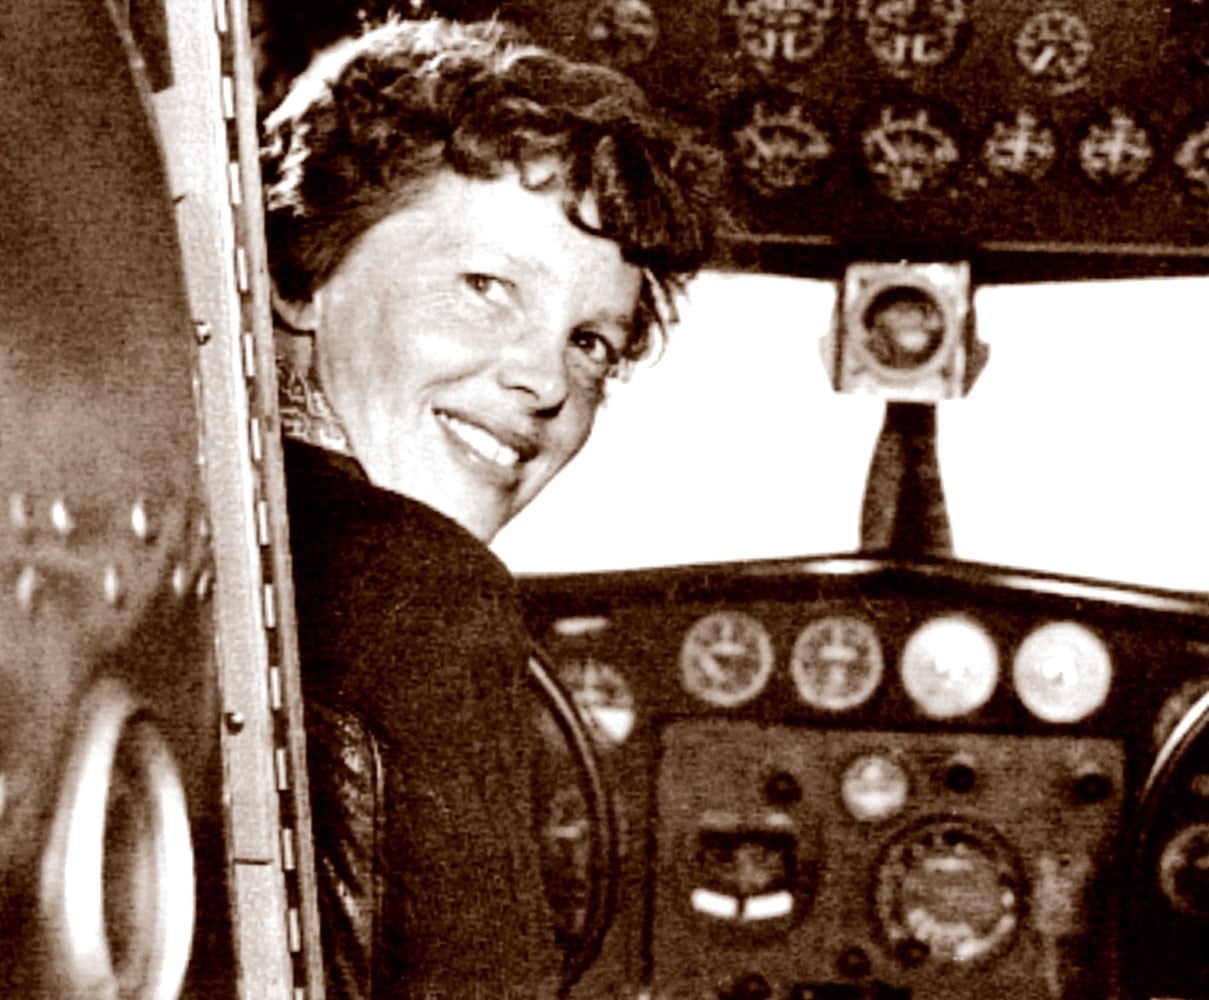 Amelia Earhart May Have Survived Crash-Landing, Newly Discovered Photo